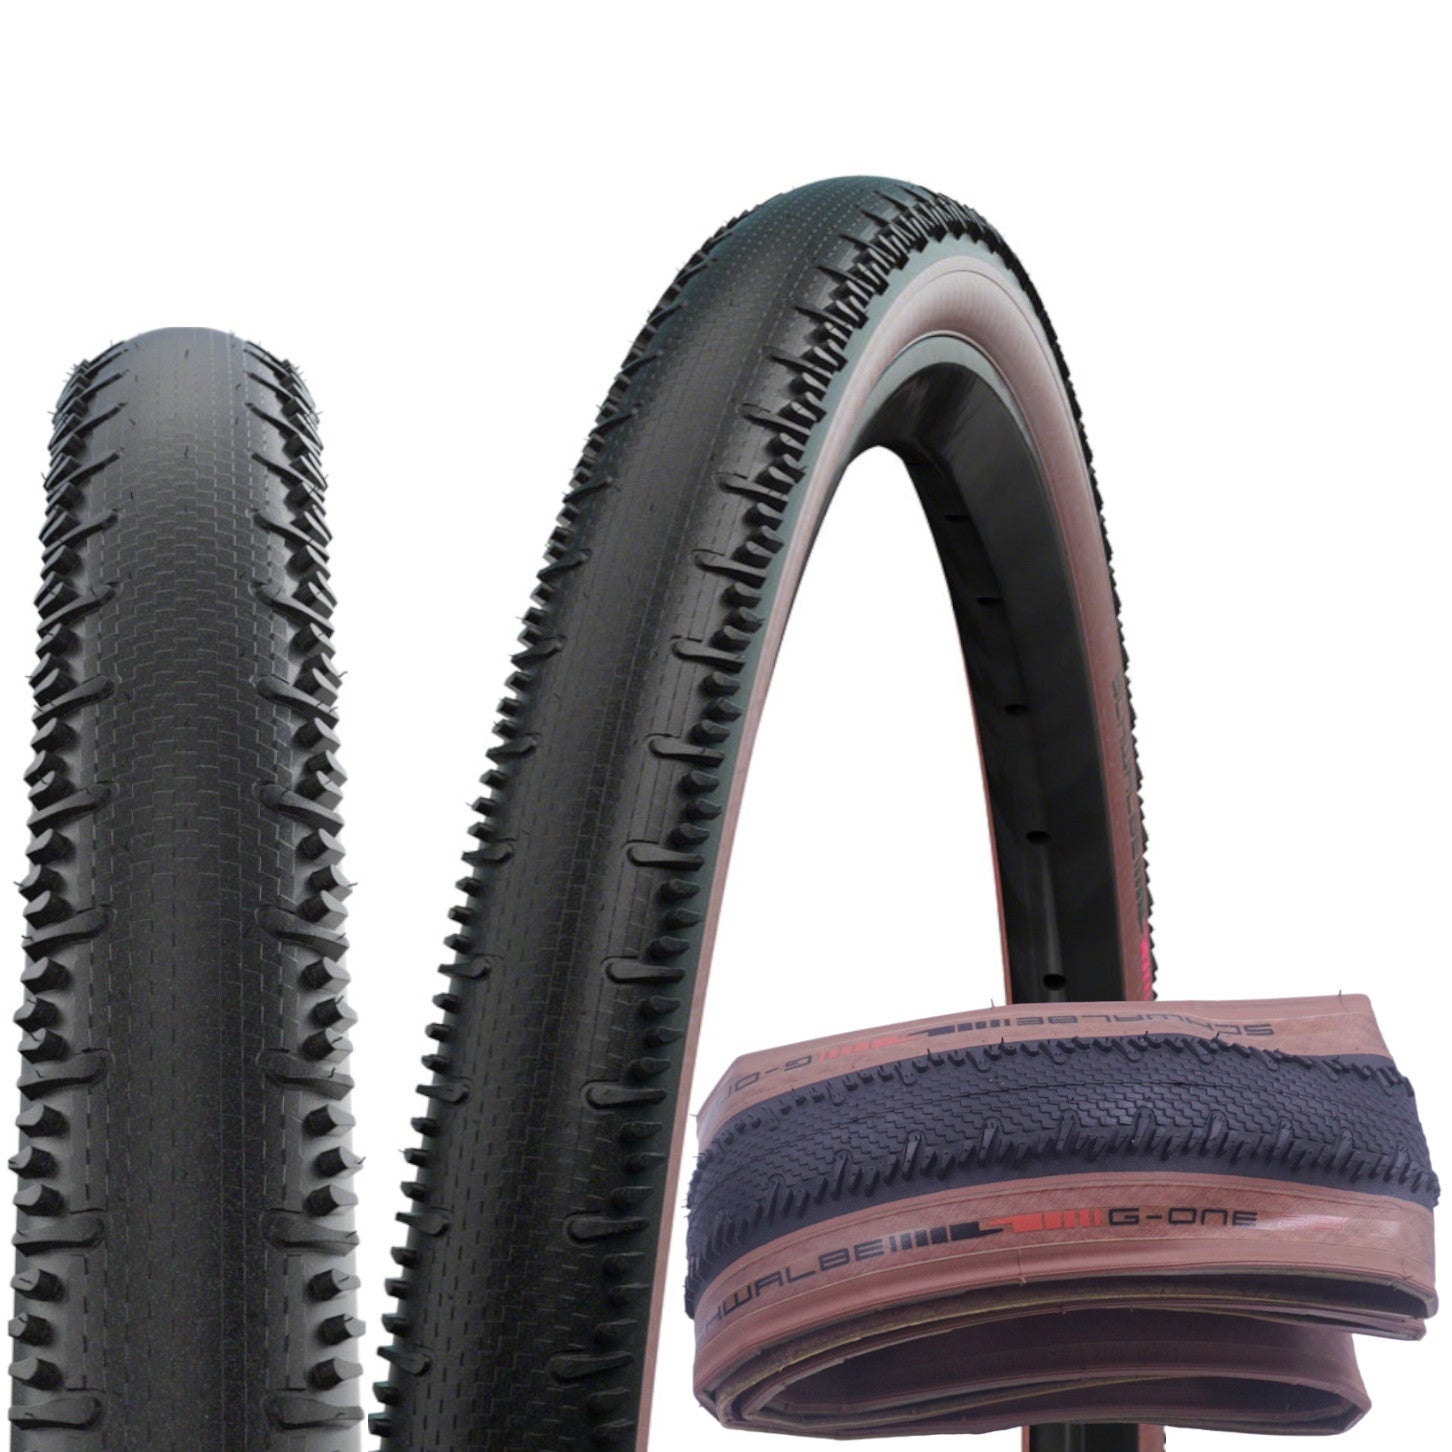 Schwalbe G-One RS 700c Brownwall Tubeless Tire